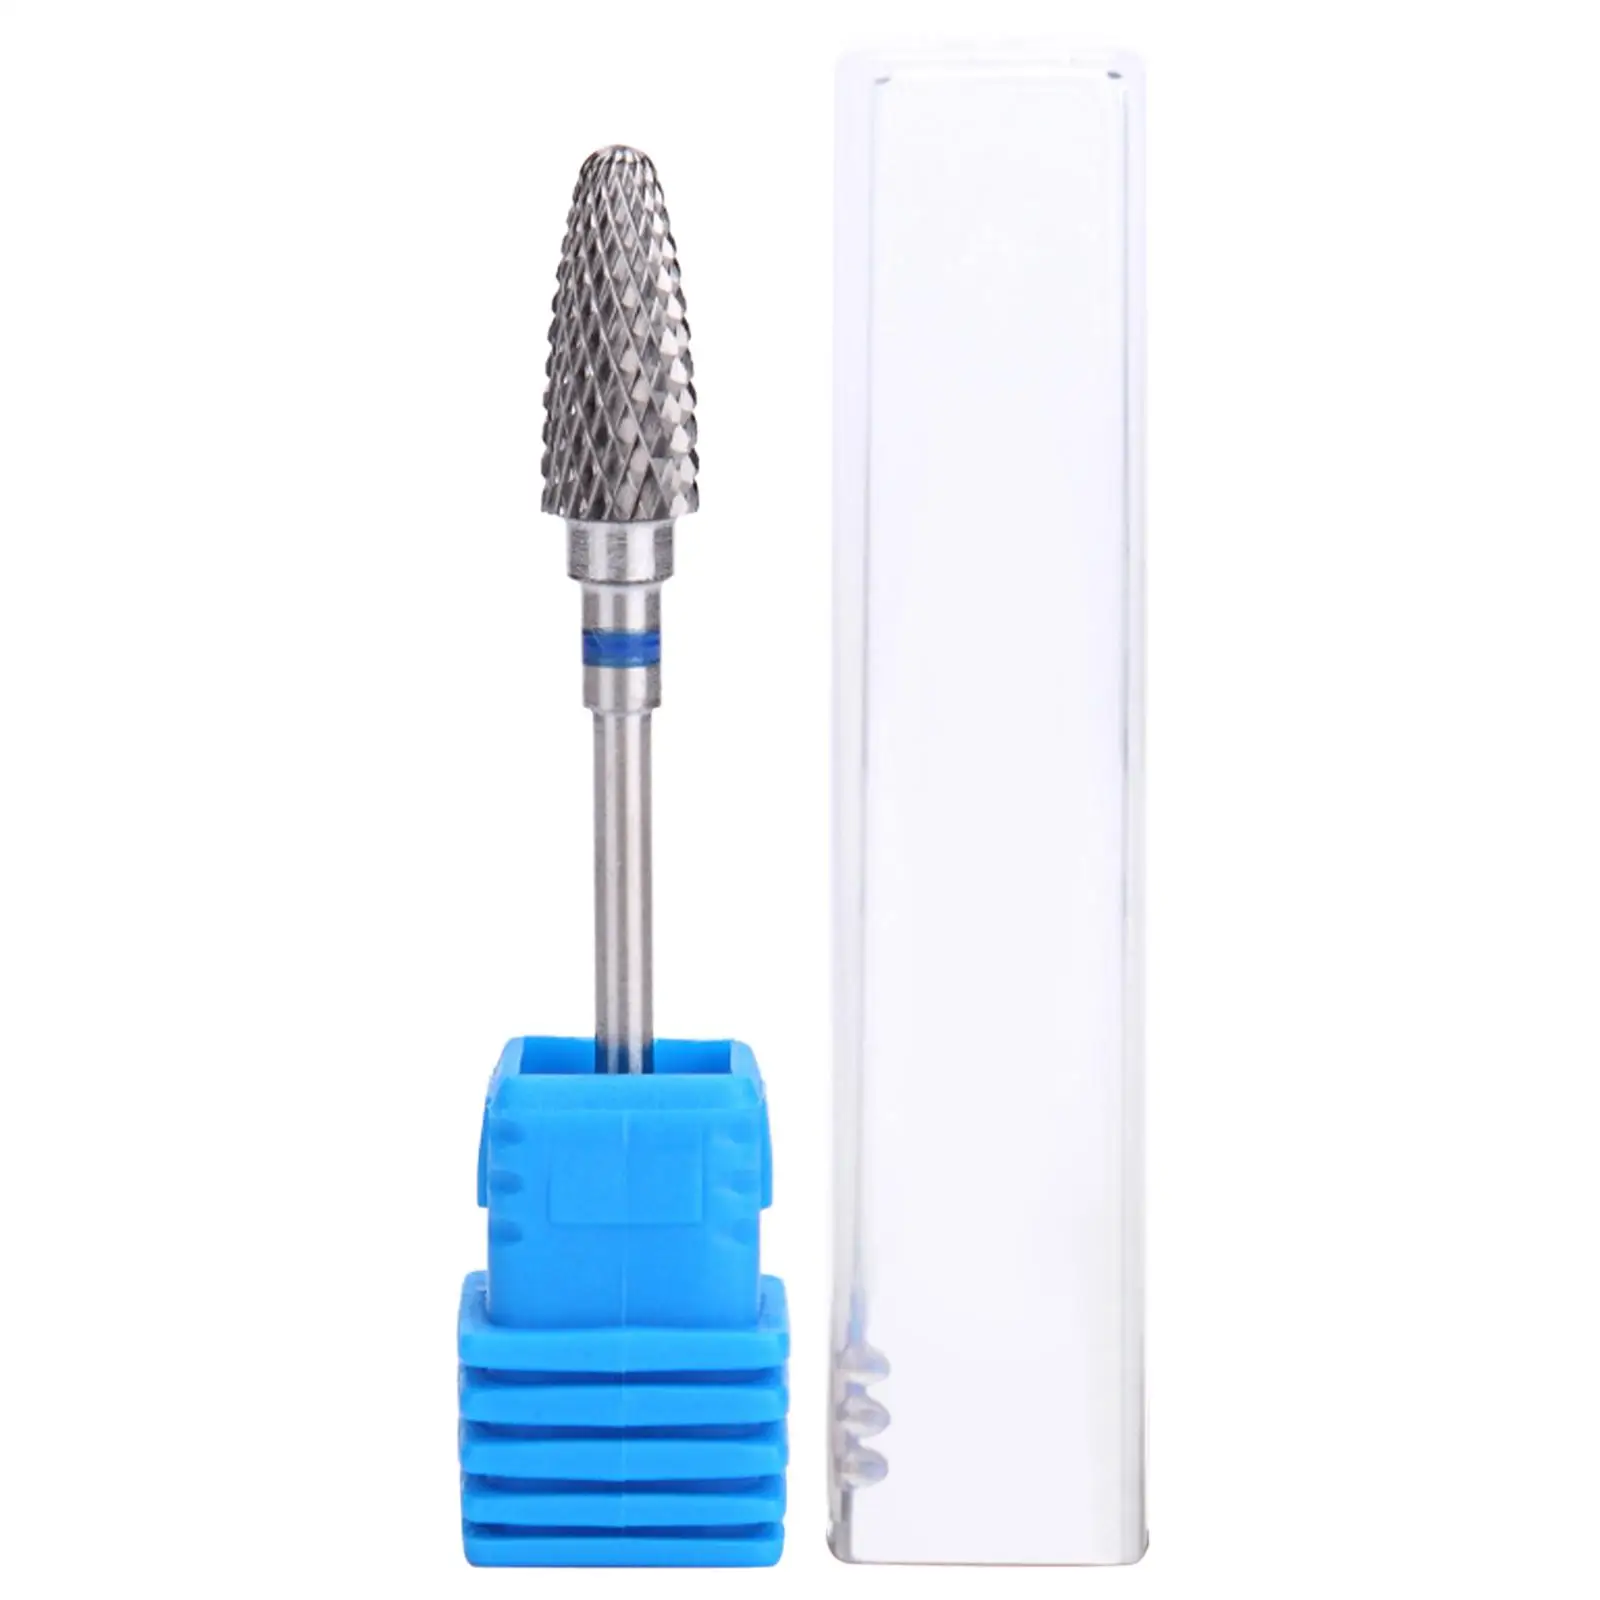 Nail Drill Bit Tungsten Steel for Processing Nails, Glass, Plastic Wide Application